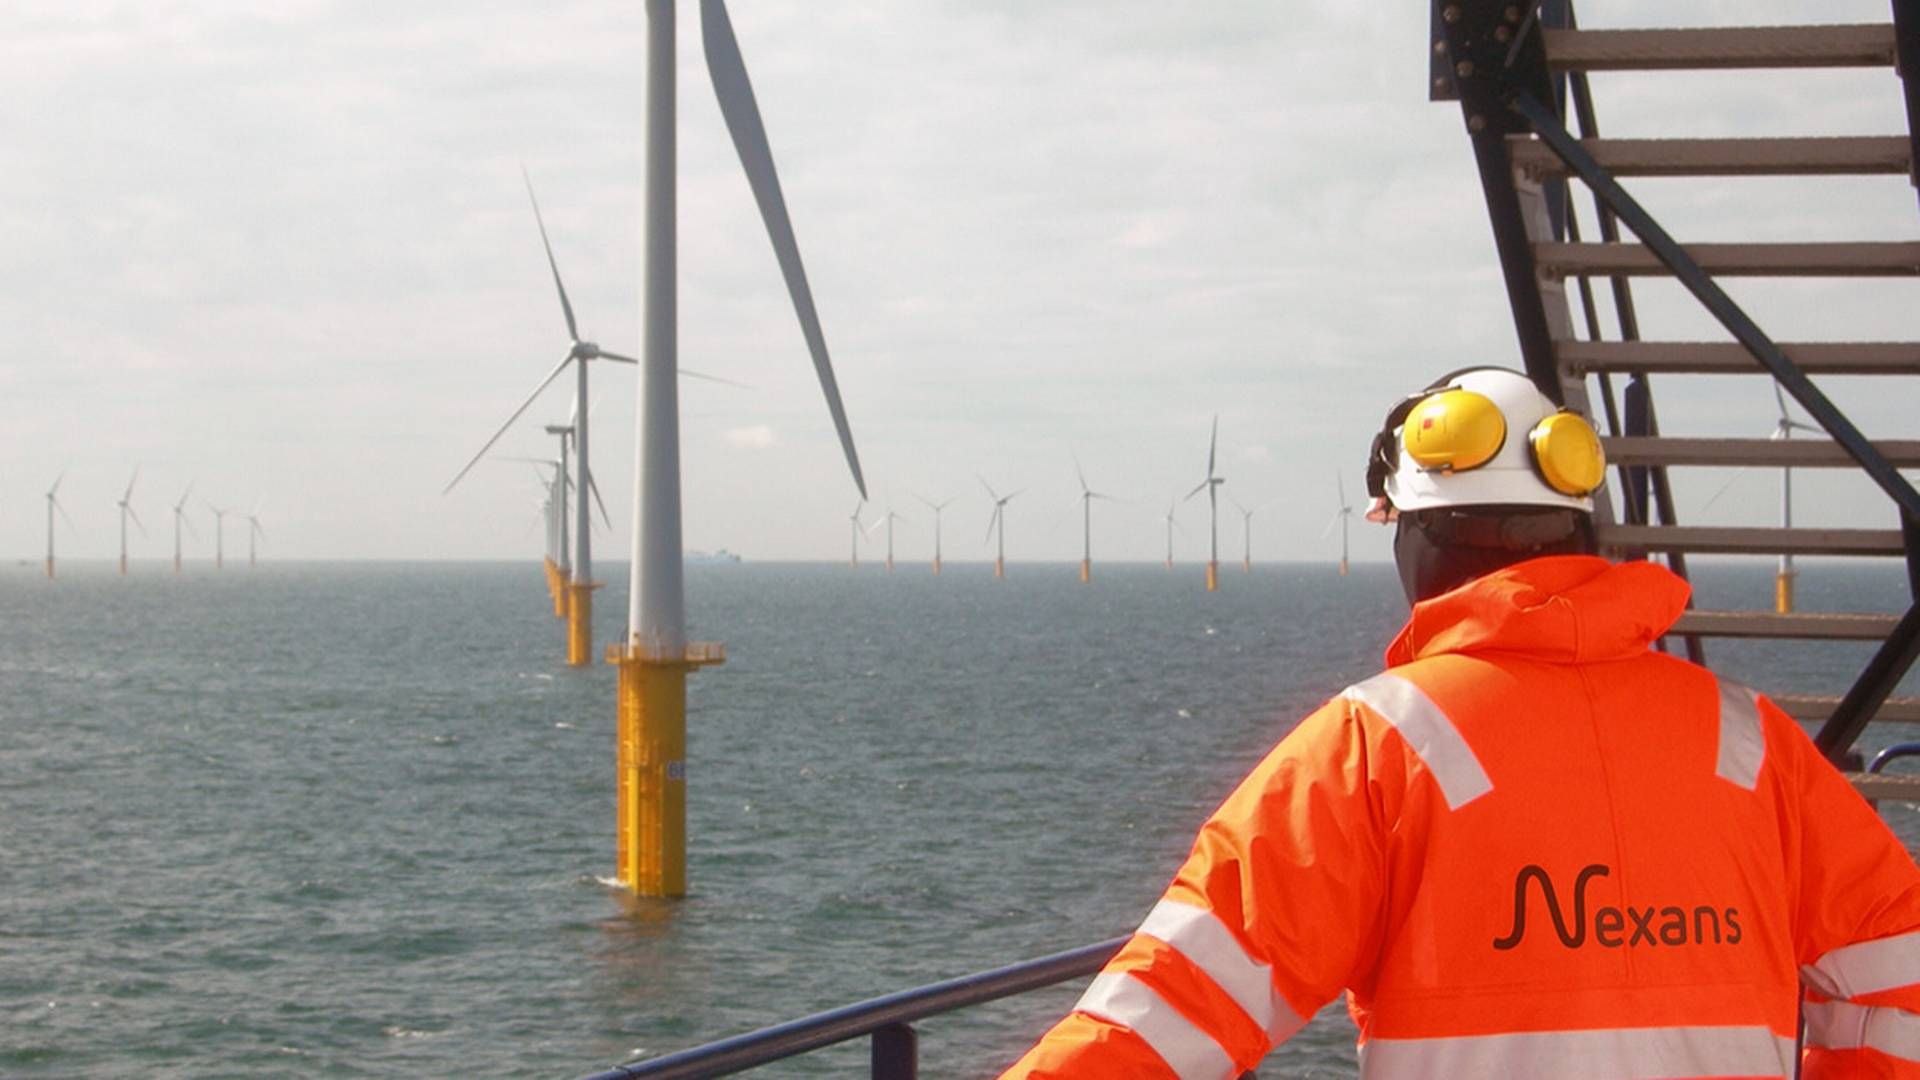 After a 12-year prelude, the first major offshore wind farm in France, Saint Brieuc, is slated for inauguration this year. And the winner from that time keeps raking in projects. | Photo: Pr / Nexans